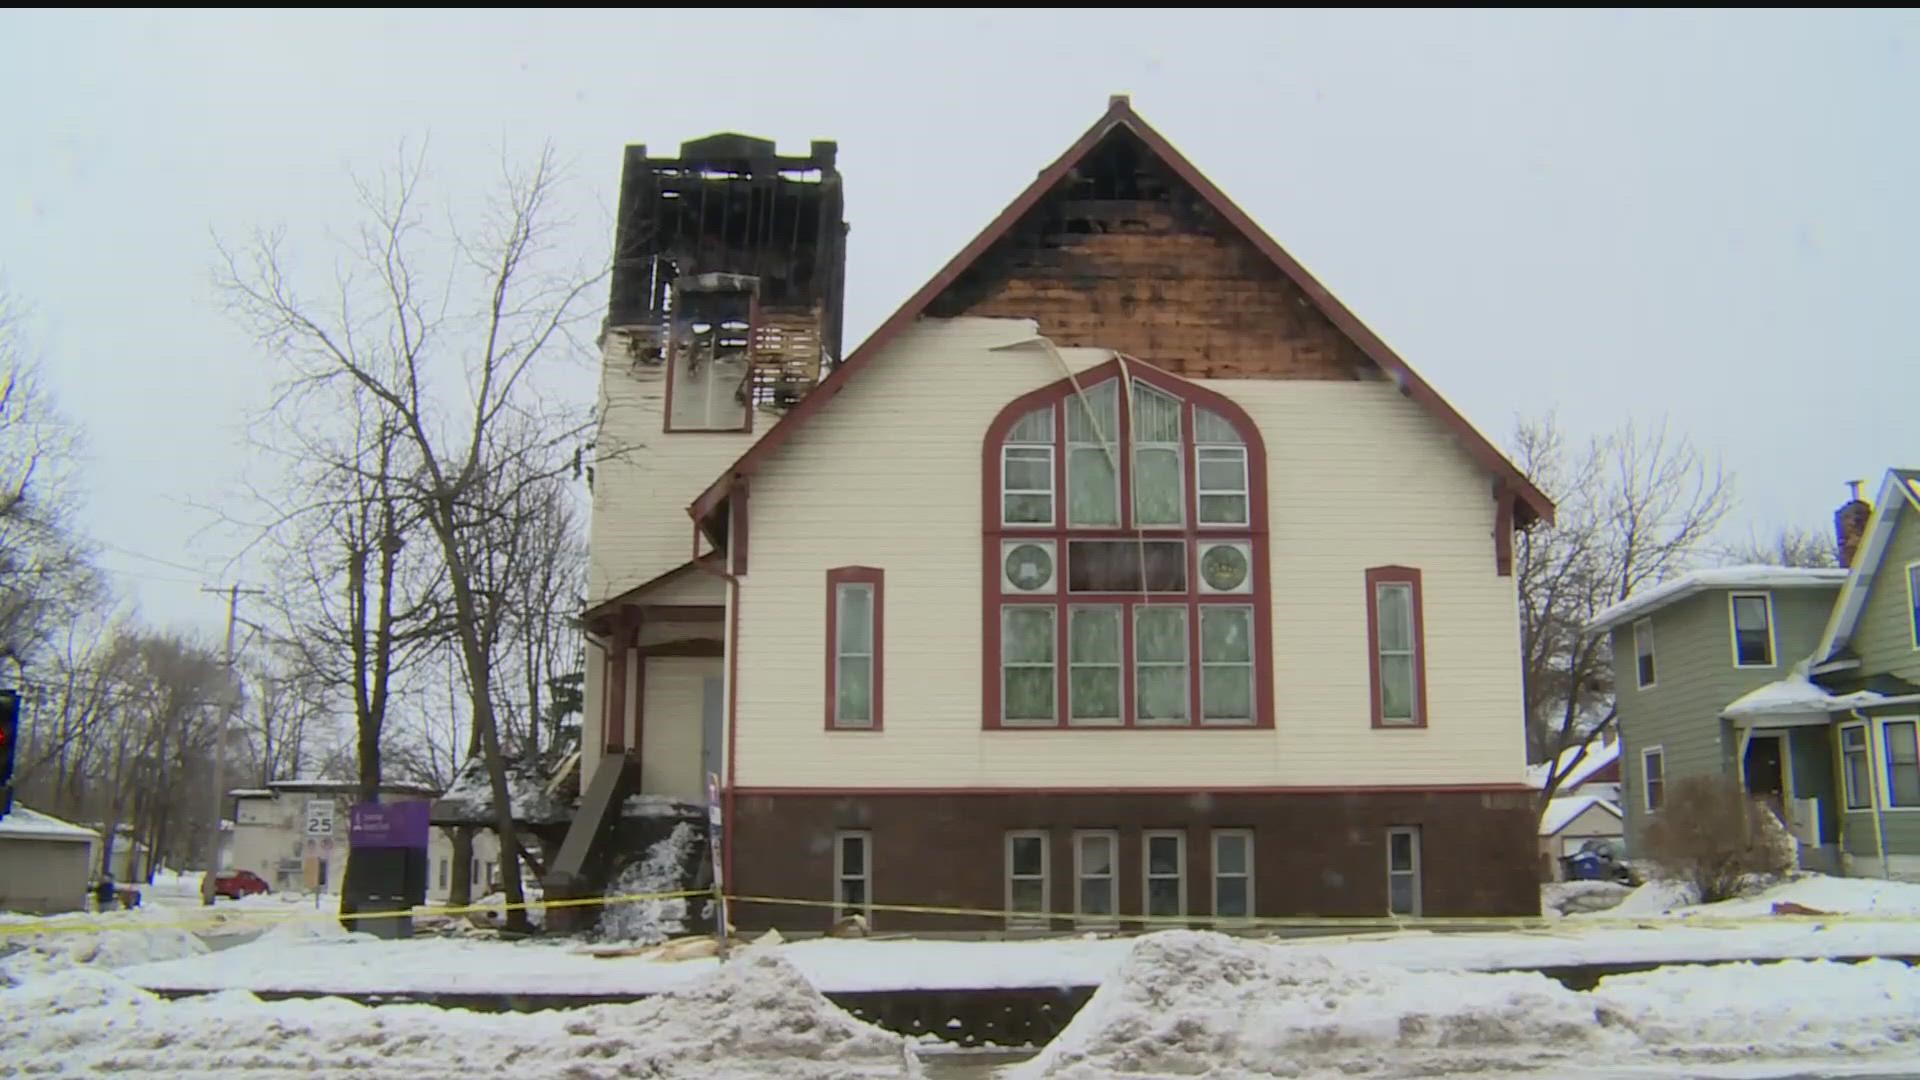 Department officials say it took nine fire companies to knock down the flames at Eastside Seventh-day Adventist Church, and that flames led to a partial collapse.